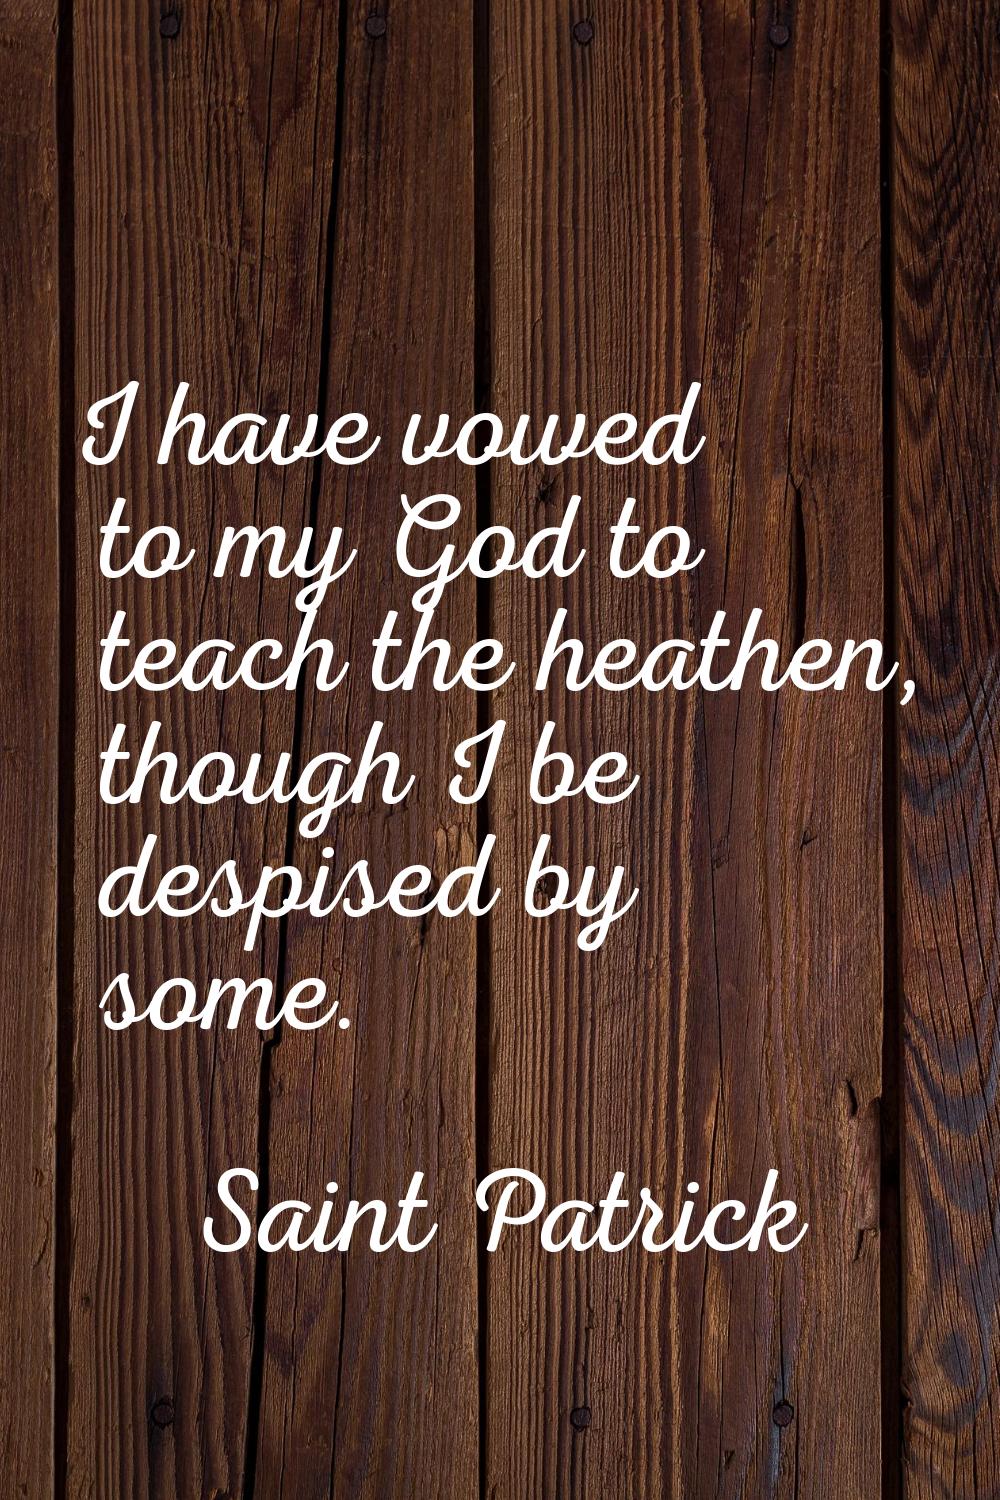 I have vowed to my God to teach the heathen, though I be despised by some.